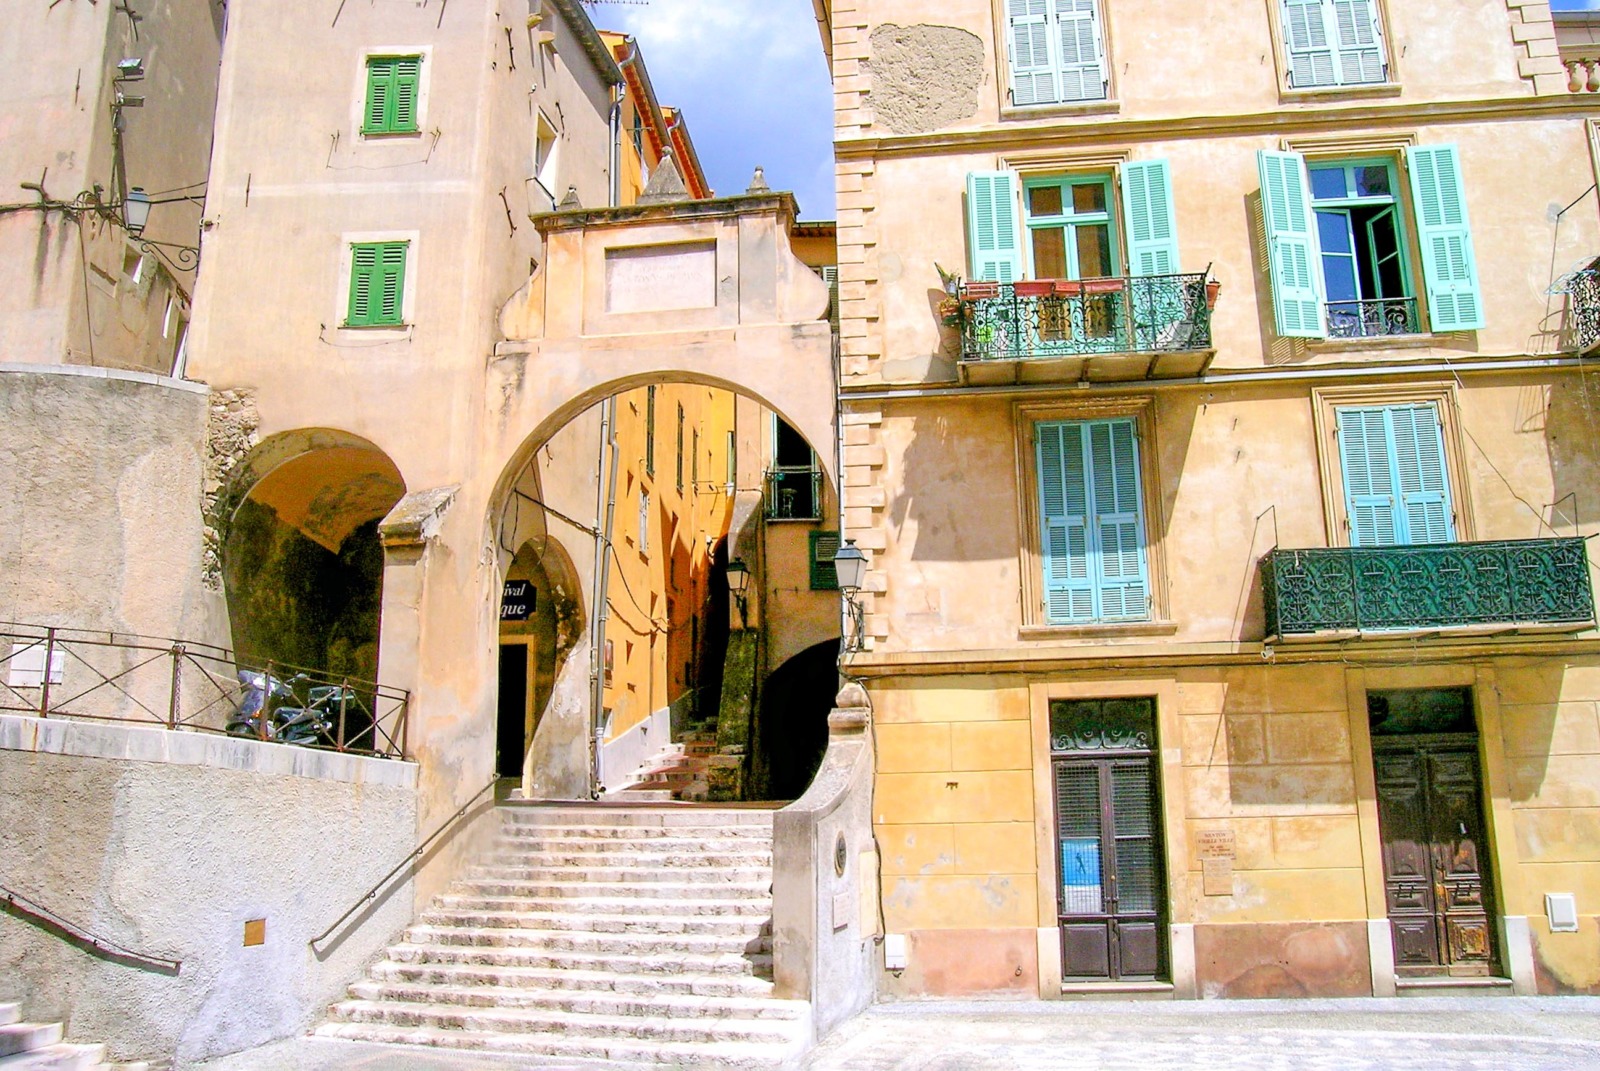 The entrance to the old town of Menton © Luca Galli - licence [CC BY 2.0] from Wikimedia Commons